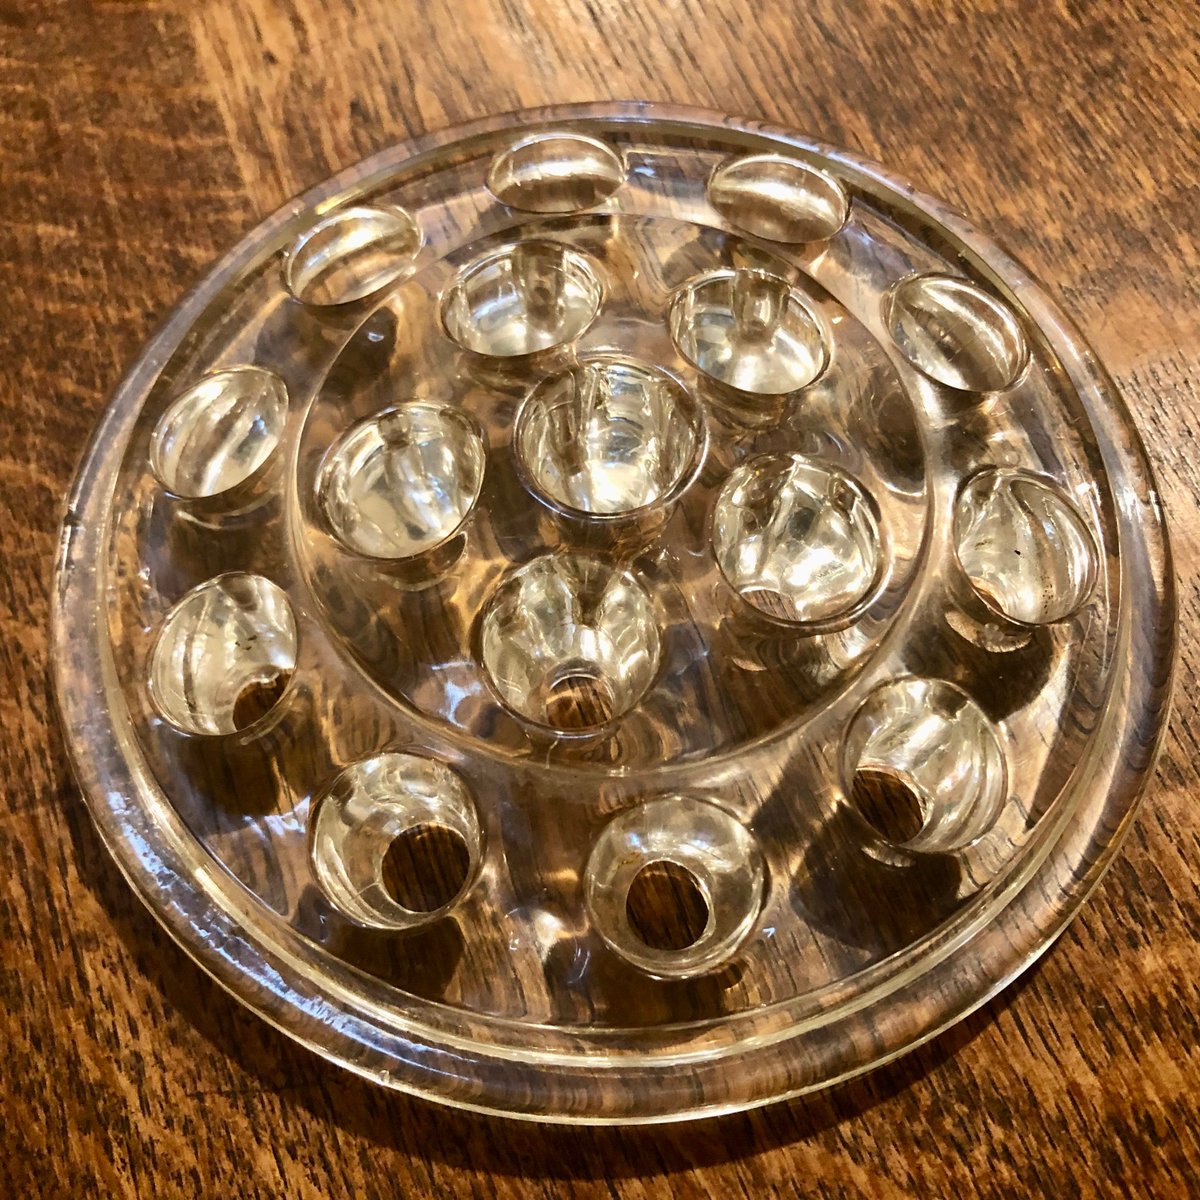 Excited to share the latest addition to my #etsy shop: Glass Flower Frog with 16 Holes #Floral #Arranging Tool Domed Paperweight #Vintage Clear Glass etsy.me/3pOvYSb #vintageglass #flowerfrog